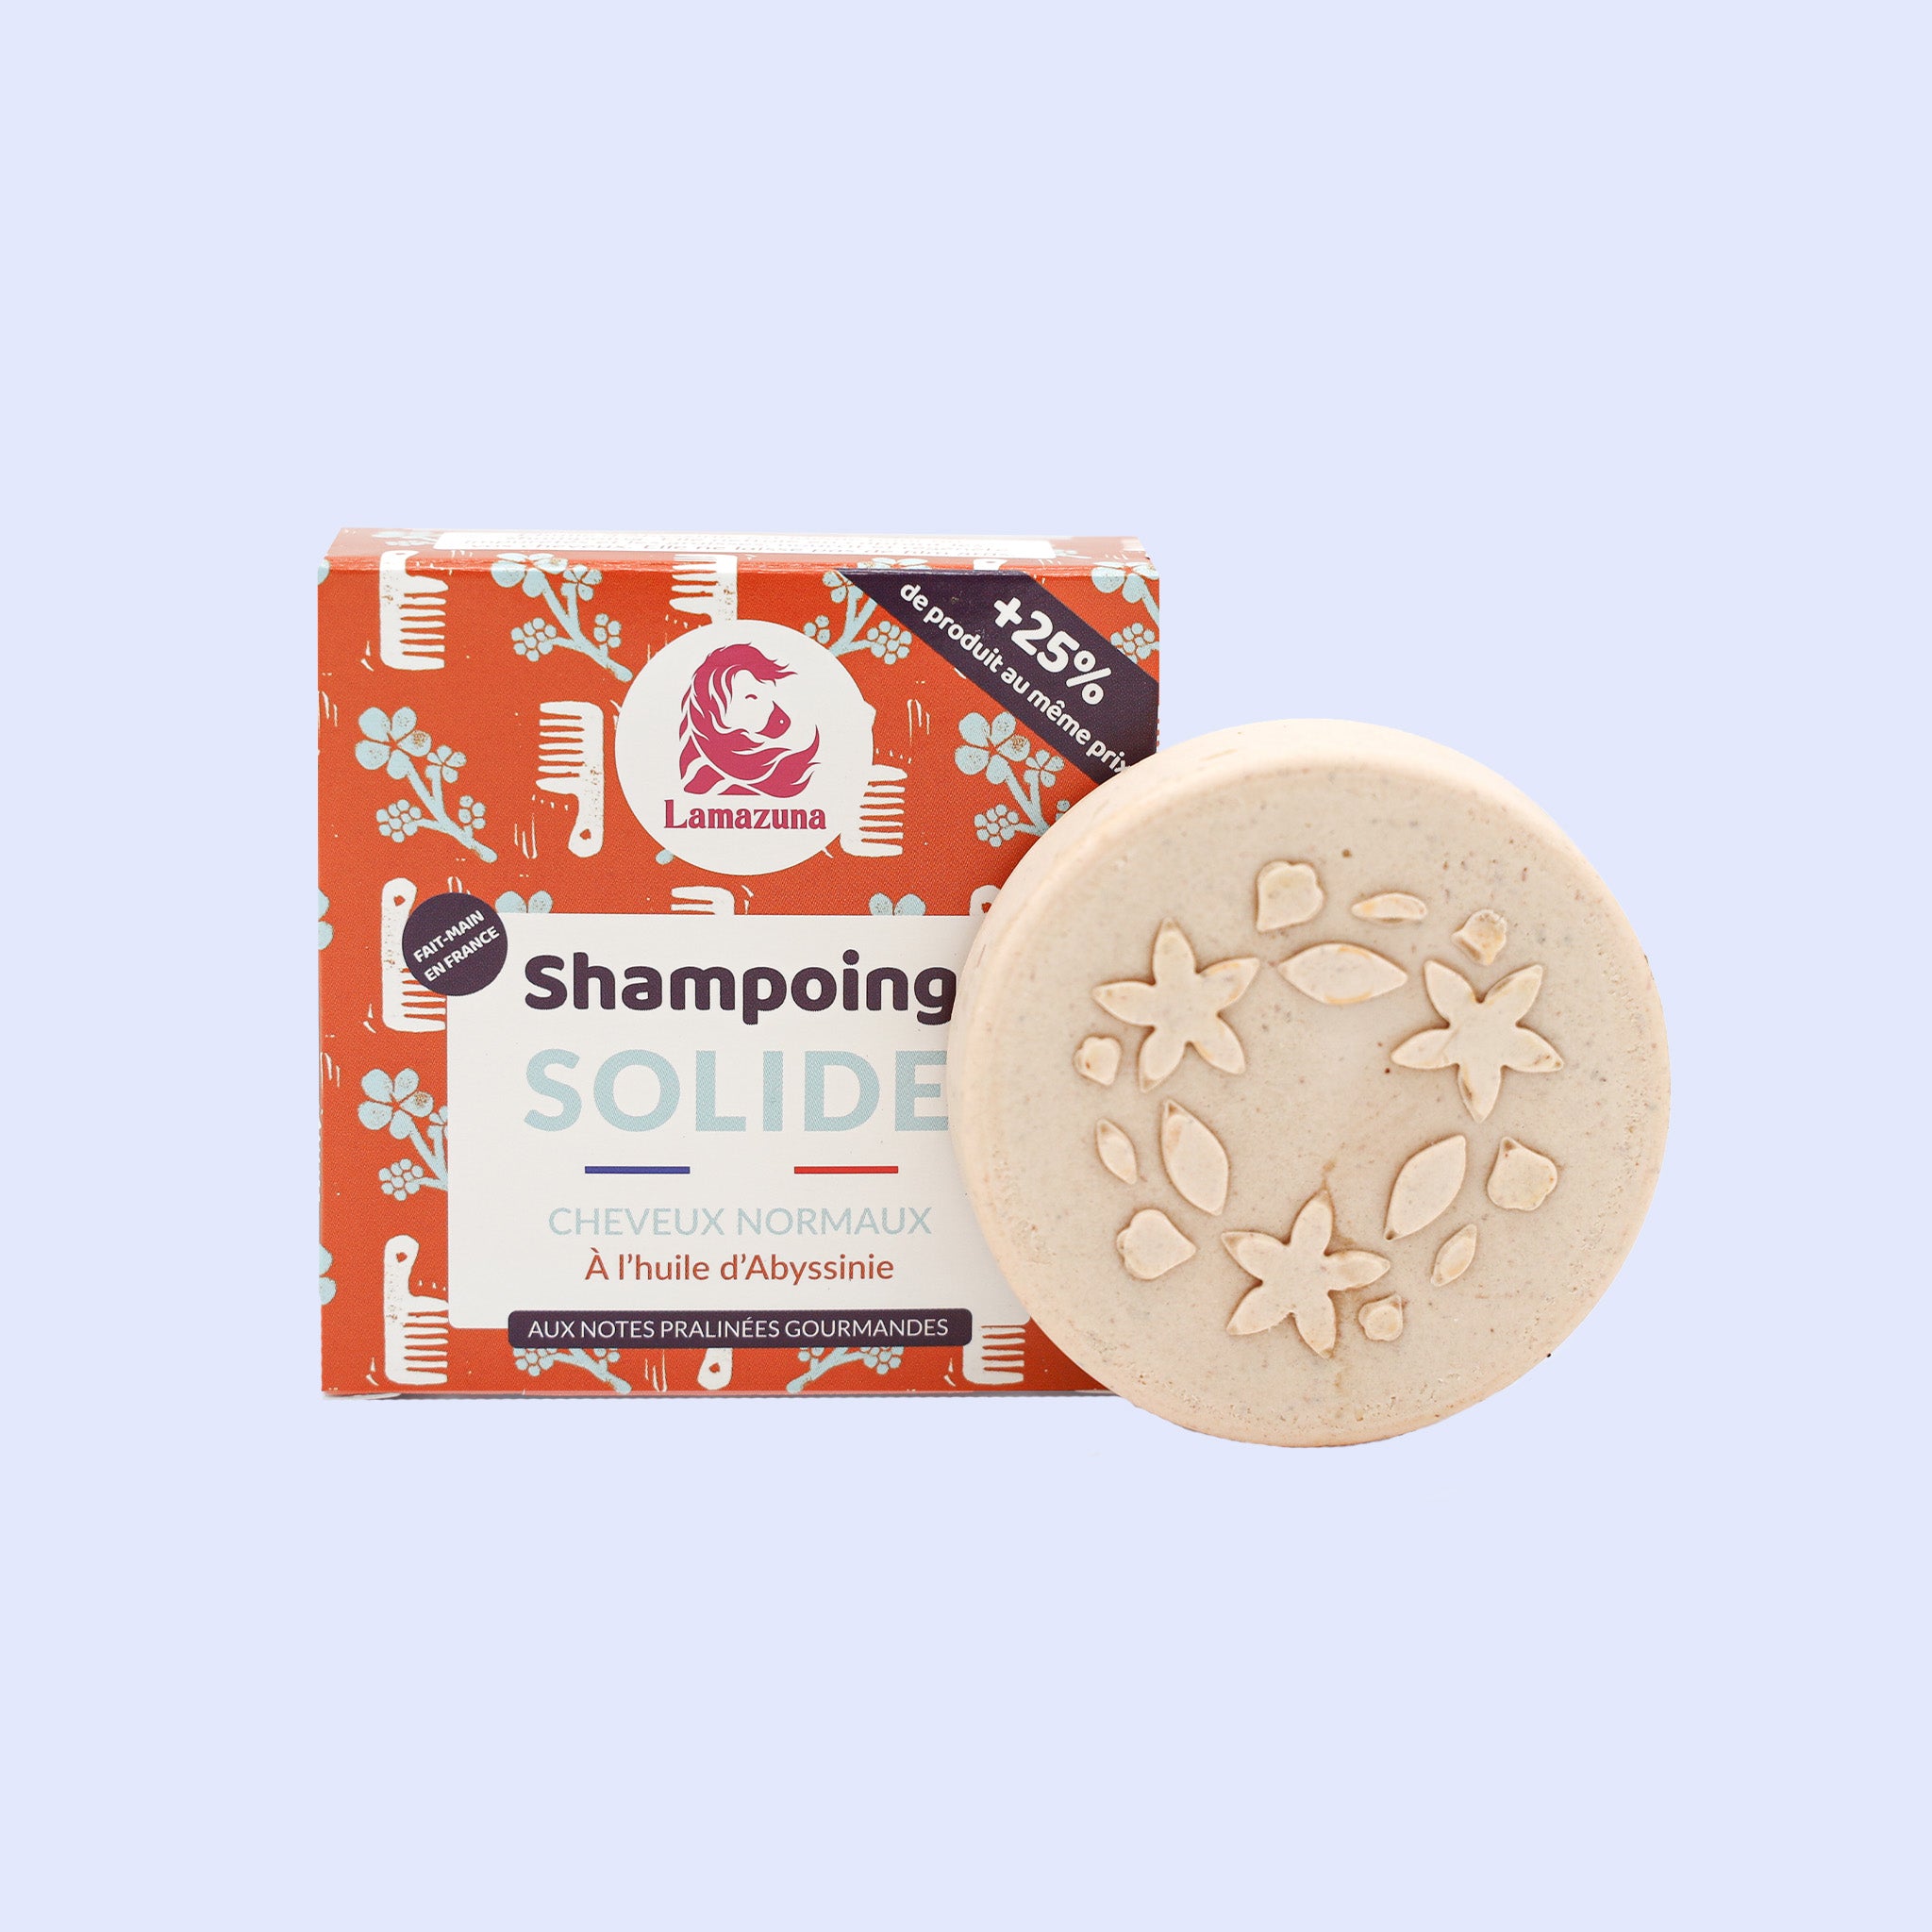 Shampoing solide pour cheveux normaux Huile d'Abyssinie